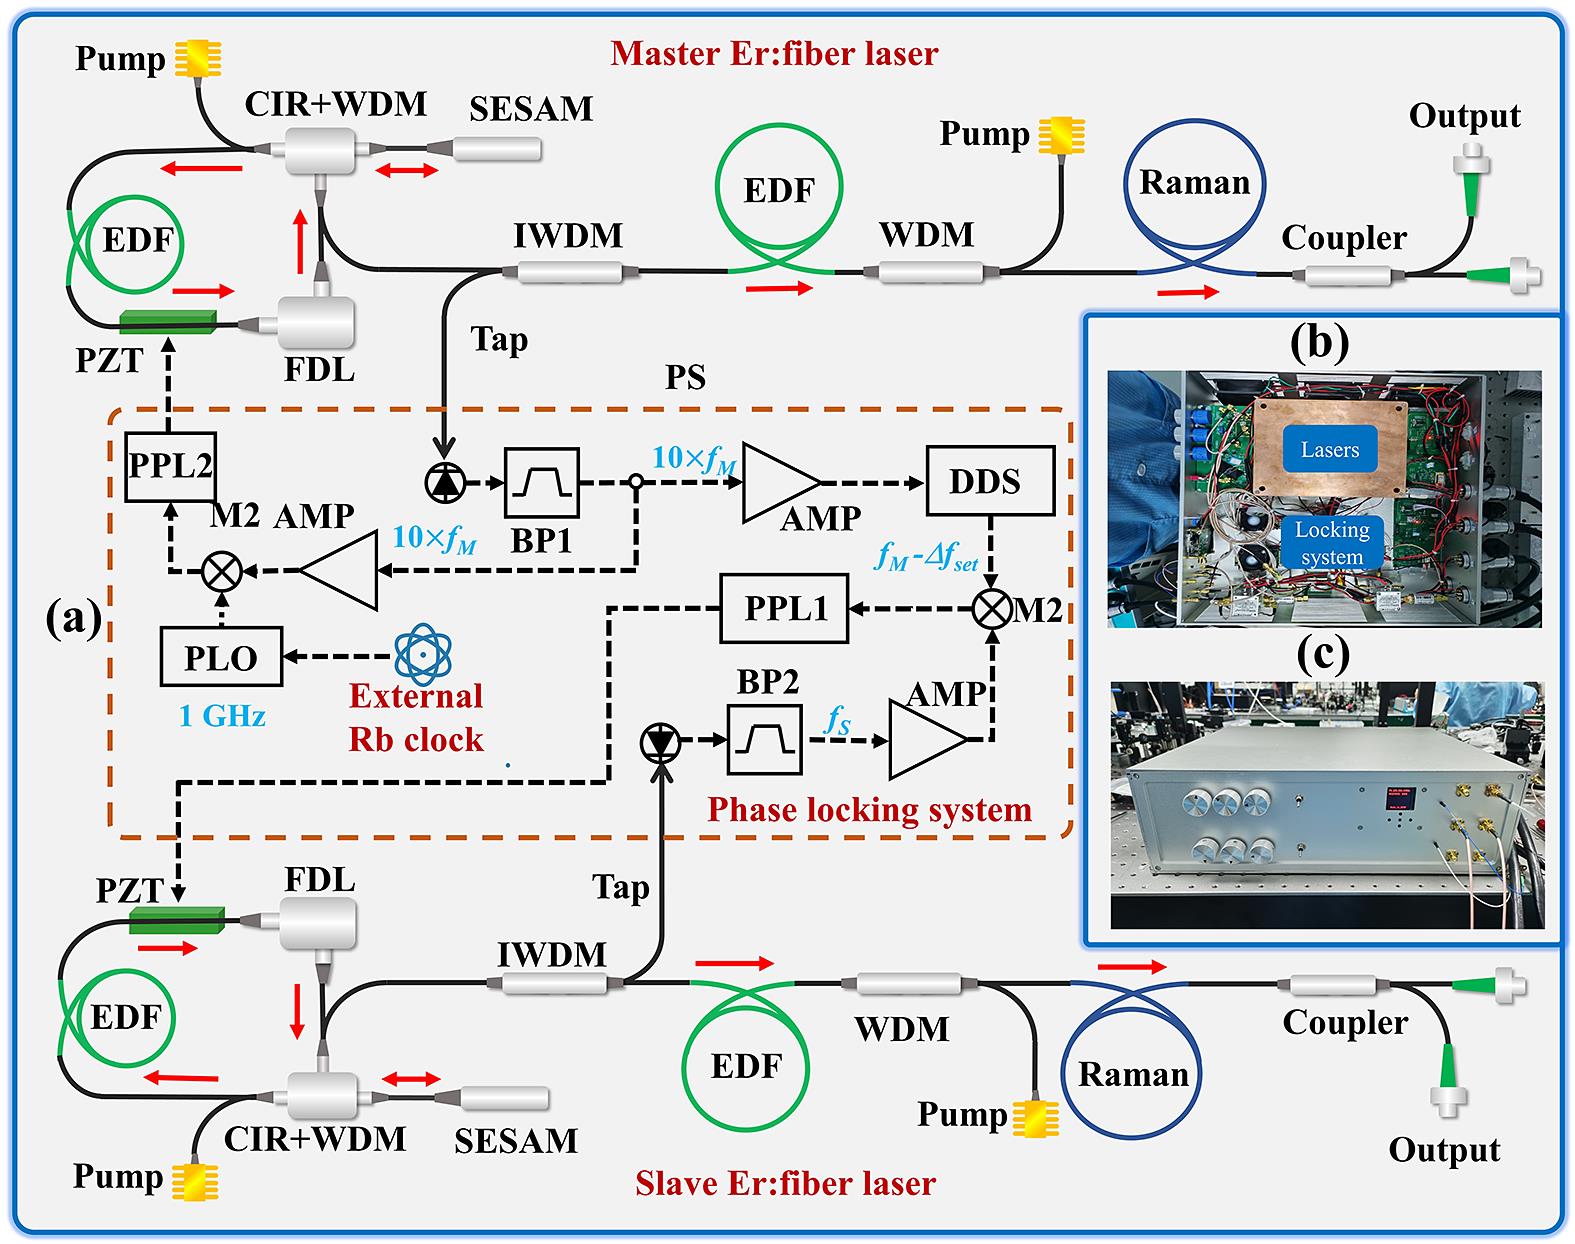 (a) Setup of the ASOPS system. CIR+WDM, 980/1550 nm wavelength-division multiplexer fiber circulator; EDF, Er-doped fiber; SESAM, semiconductor saturable absorption mirror; PZT, piezoelectric transducer; FDL, electrically controlled fiber delay line; IWDM, wavelength-division multiplexer with isolator; PD, fiber-coupled photodiode; Raman, polarization-maintaining Raman fiber; PS, power splitter; PLO, phase-locked oscillator; DDS, direct-digital synthesis component; BP, electronic band-pass filter; AMP, amplifier; M1 and M2, electronic mixers; PLL1 and PPL2, phase-locked loops; fM, master repetition rate; fS, slave repetition rate; Δfset, desired offset frequency. The formulas in blue give the corresponding frequencies inside the error-signal unit branches. The straight and dashed lines correspond to the optical beams and electronic connections, respectively. (b) Internal structure diagram of the ASOPS system. The master and slave lasers were enclosed in two closed copper boxes, respectively. (c) Integrated ASOPS system prototype.